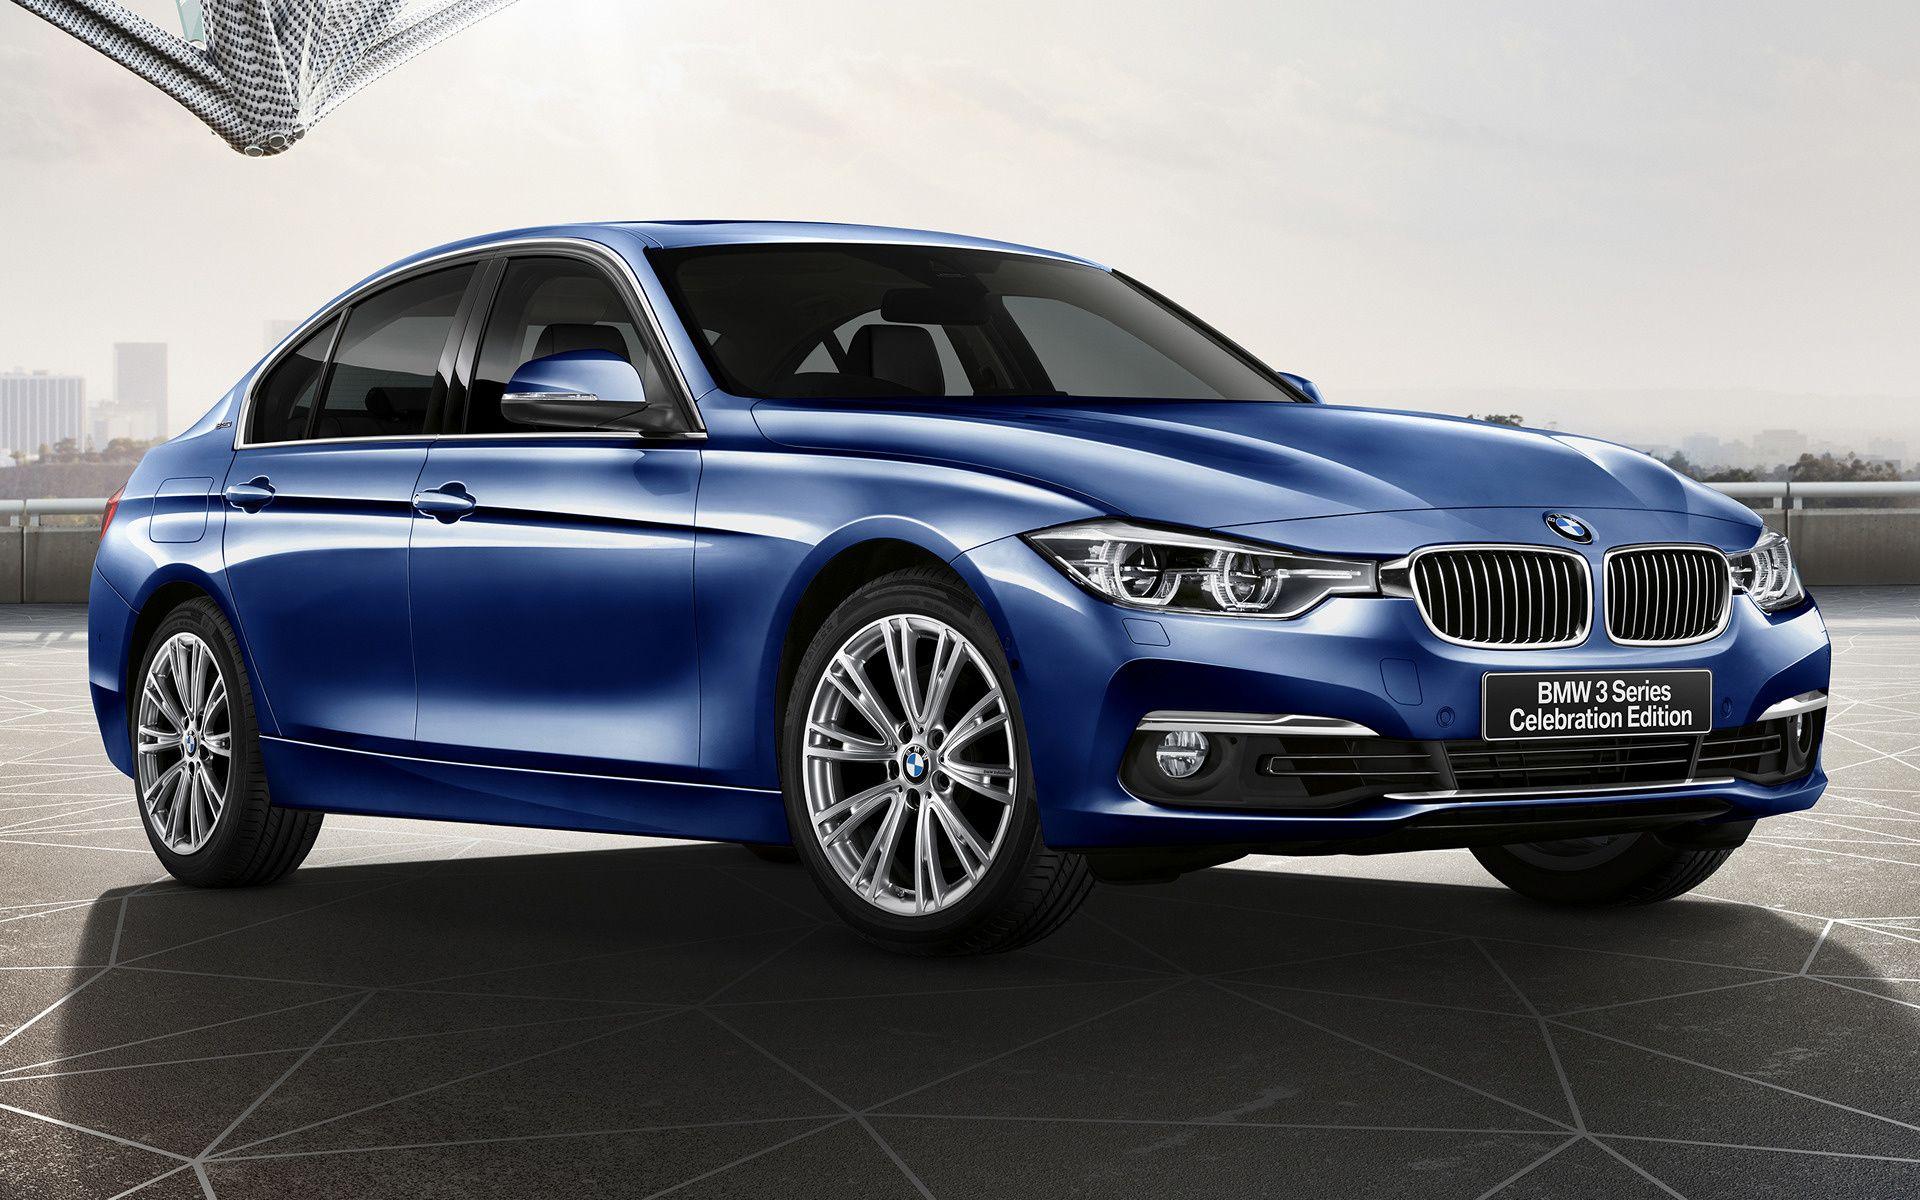 BMW 3 Series Celebration Edition (2016) JP Wallpaper and HD